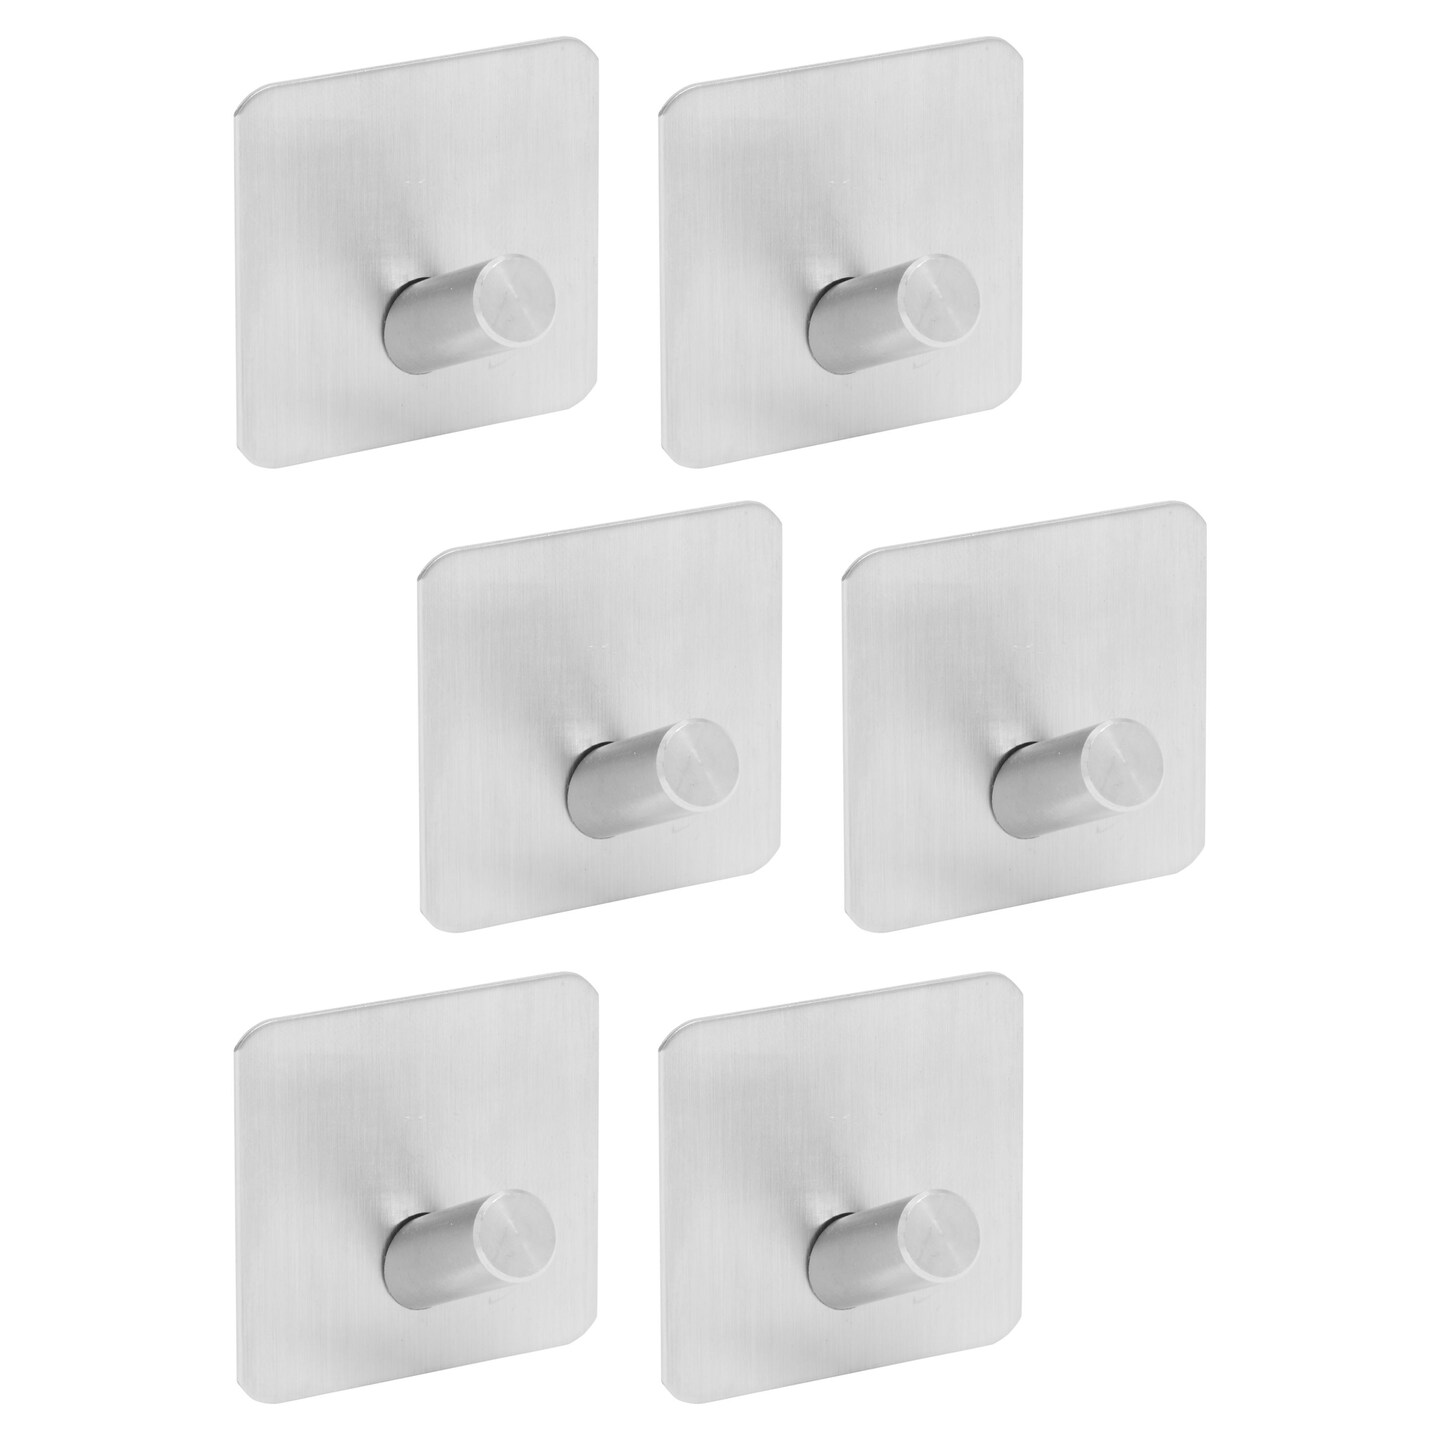 Stainless Steel Heavy Duty Adhesive Wall Hooks for Hanging (1.76